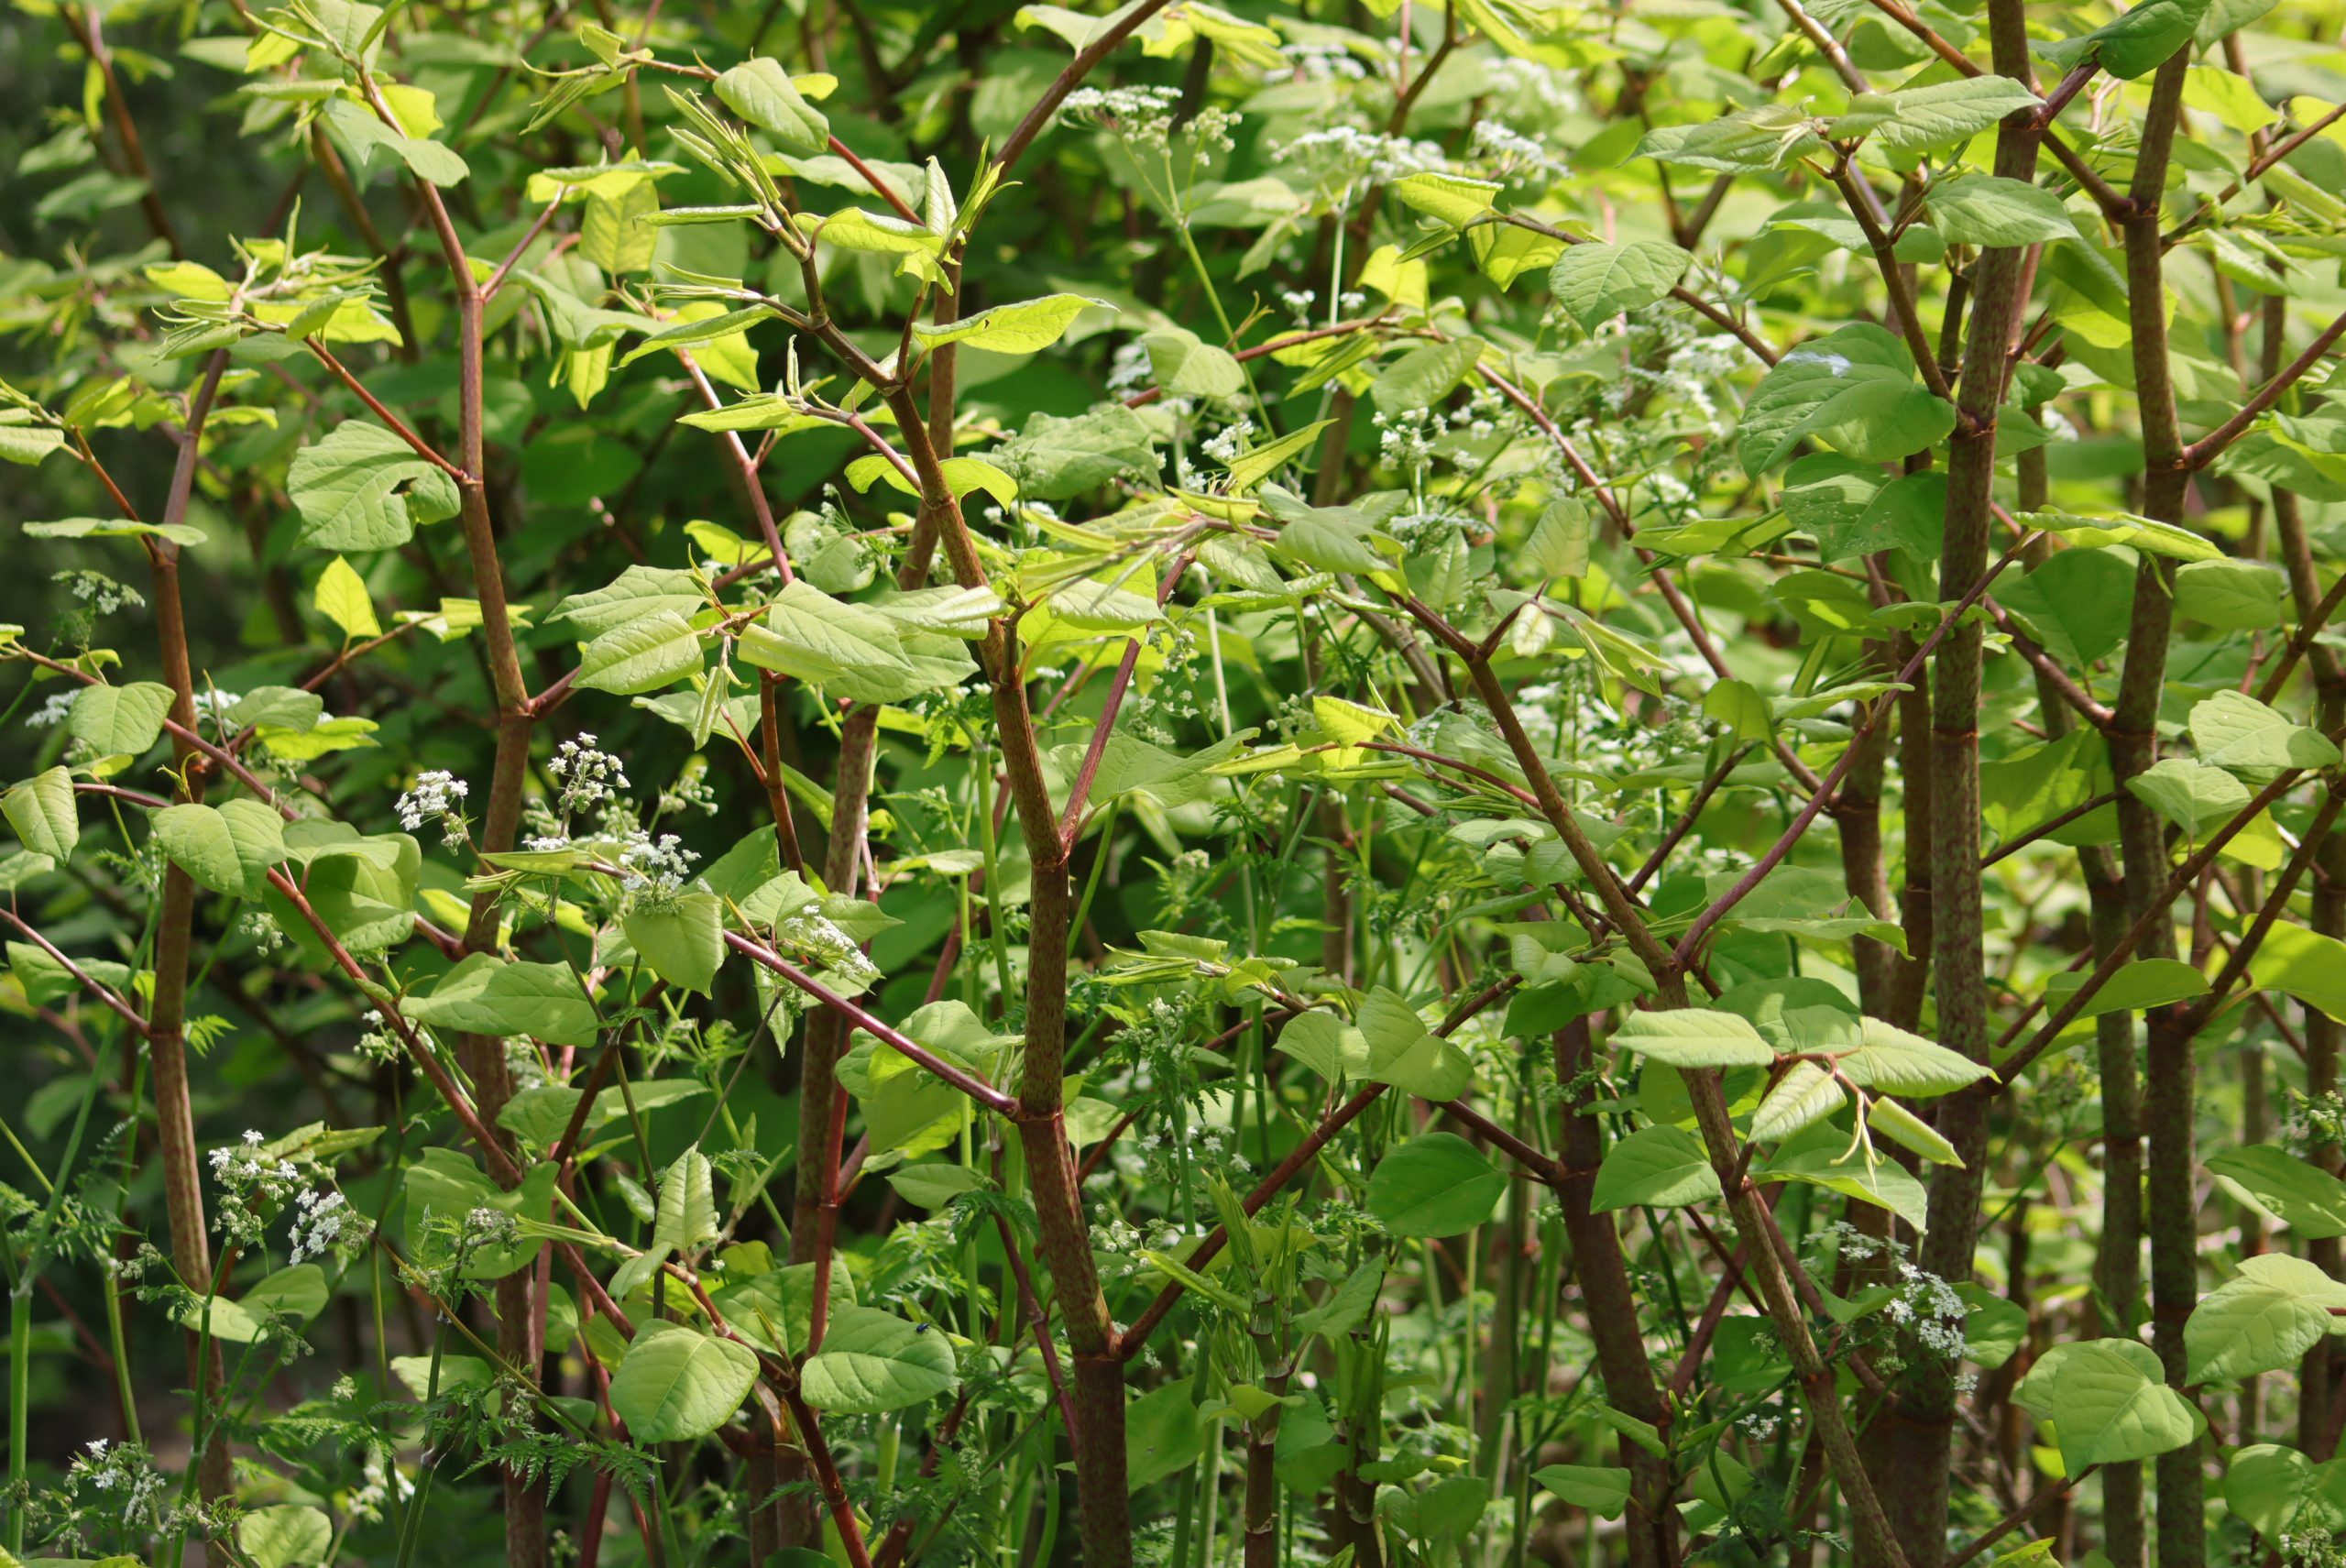 Map reveals Japanese knotweed hotspots in UK as invasive plant wrecks thousands of homes – is your town on the list?